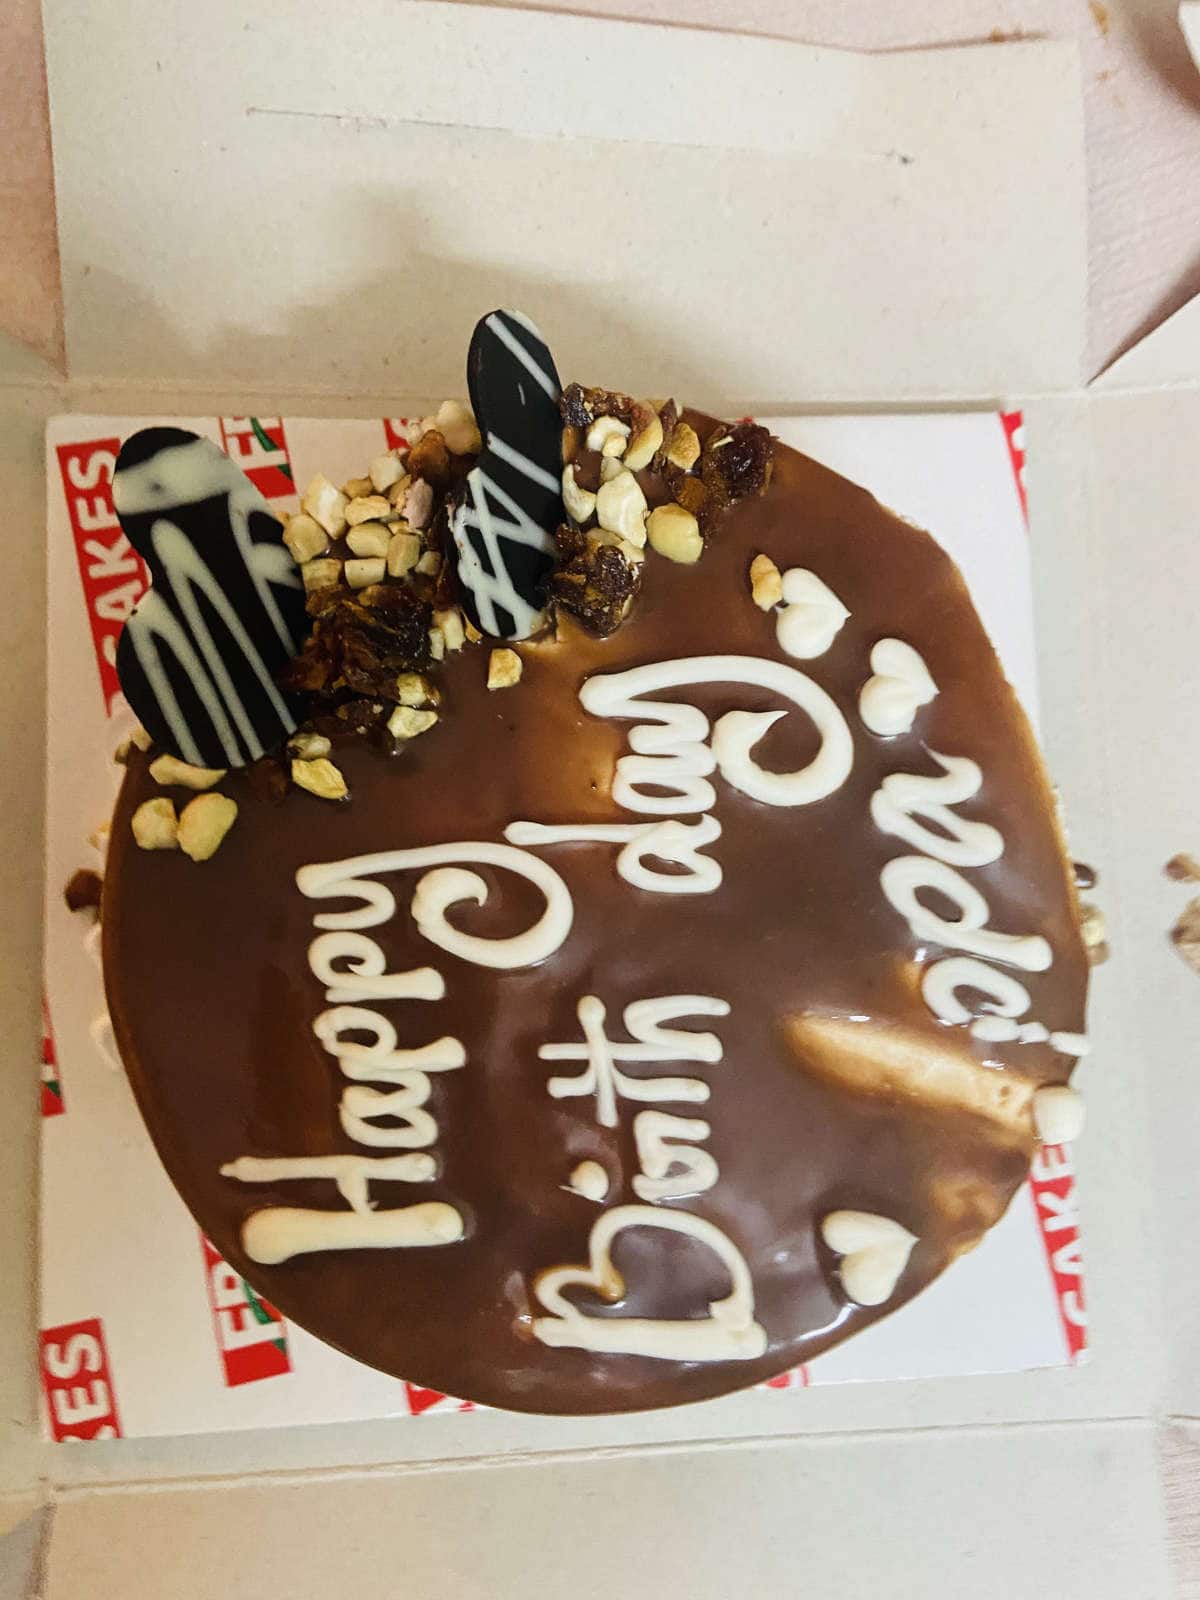 Top 24 Hours Cake Delivery Services in Pallavaram - Best 24 Hrs Cake  Delivery Services Chennai - Justdial